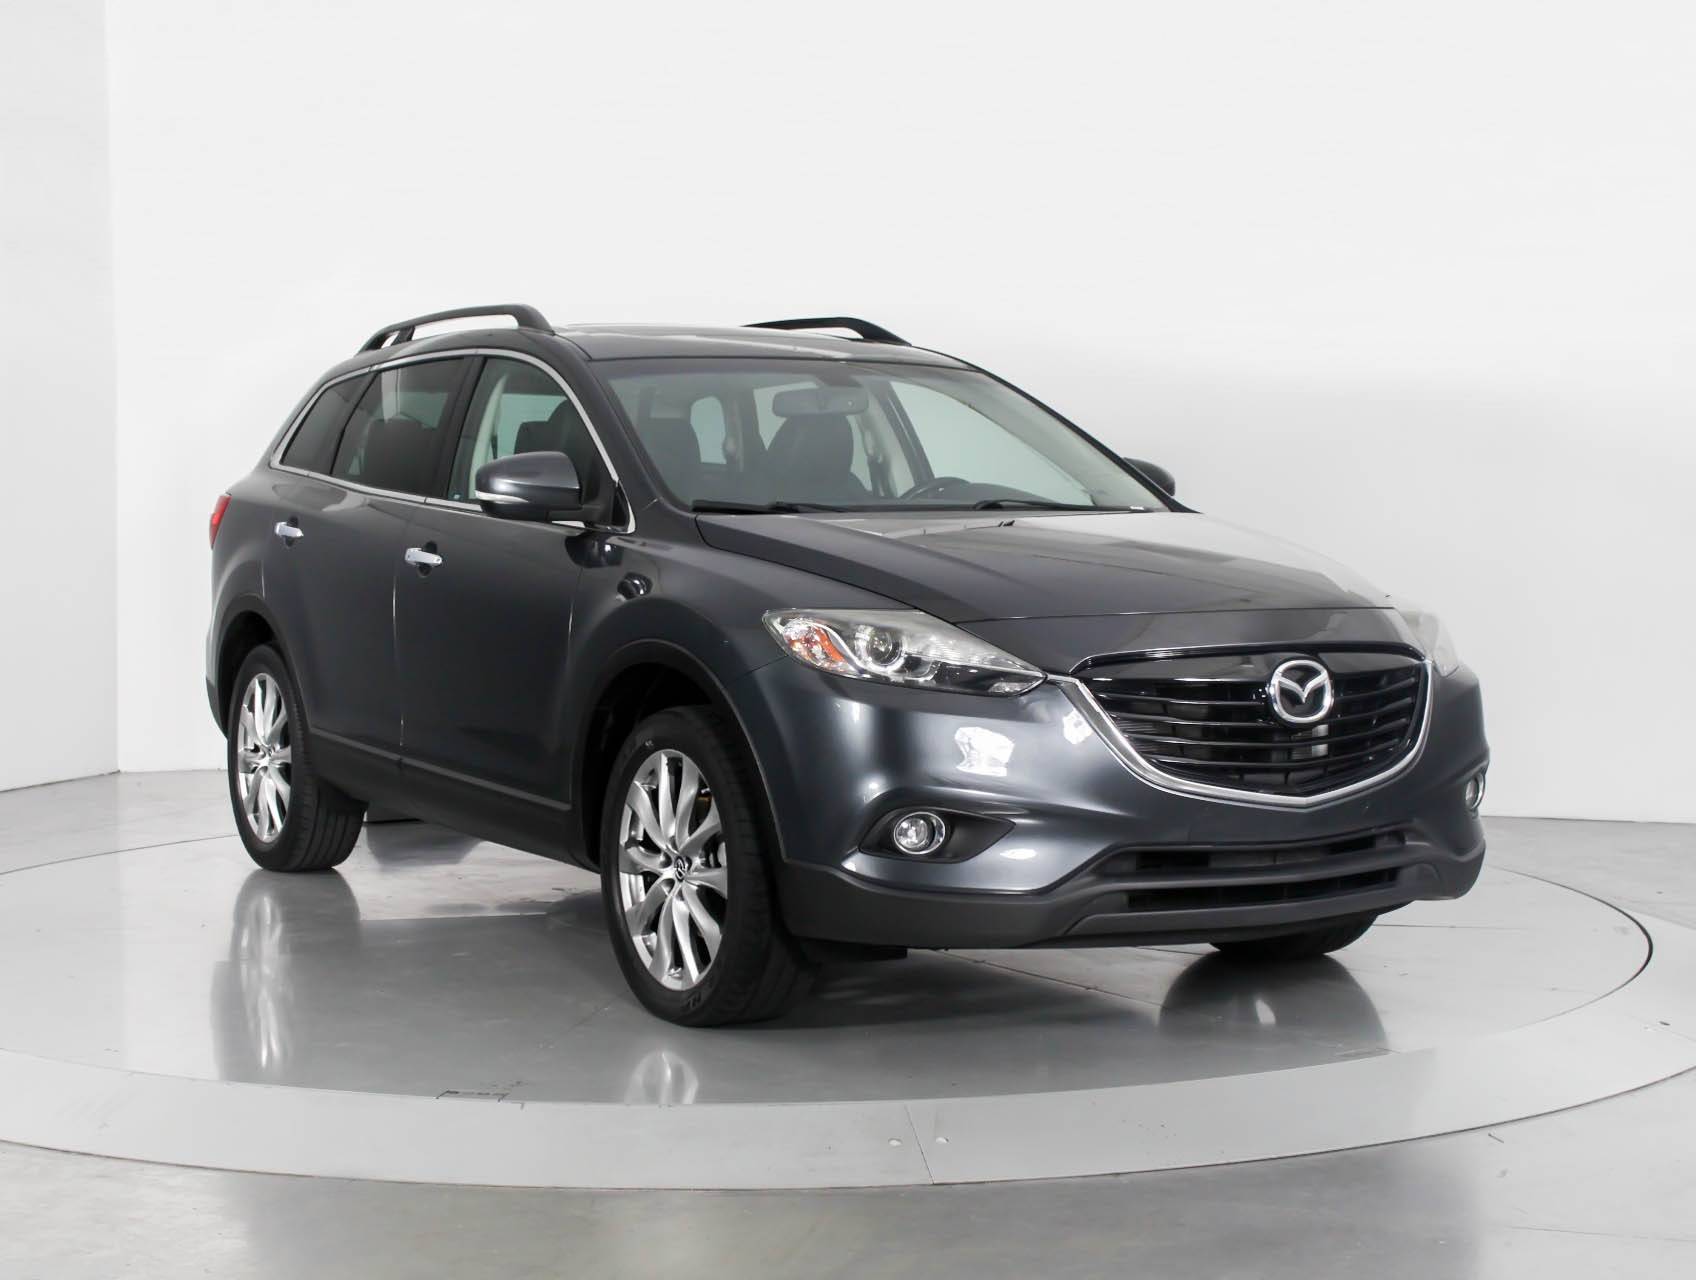 Florida Fine Cars - Used MAZDA CX 9 2014 WEST PALM GRAND TOURING